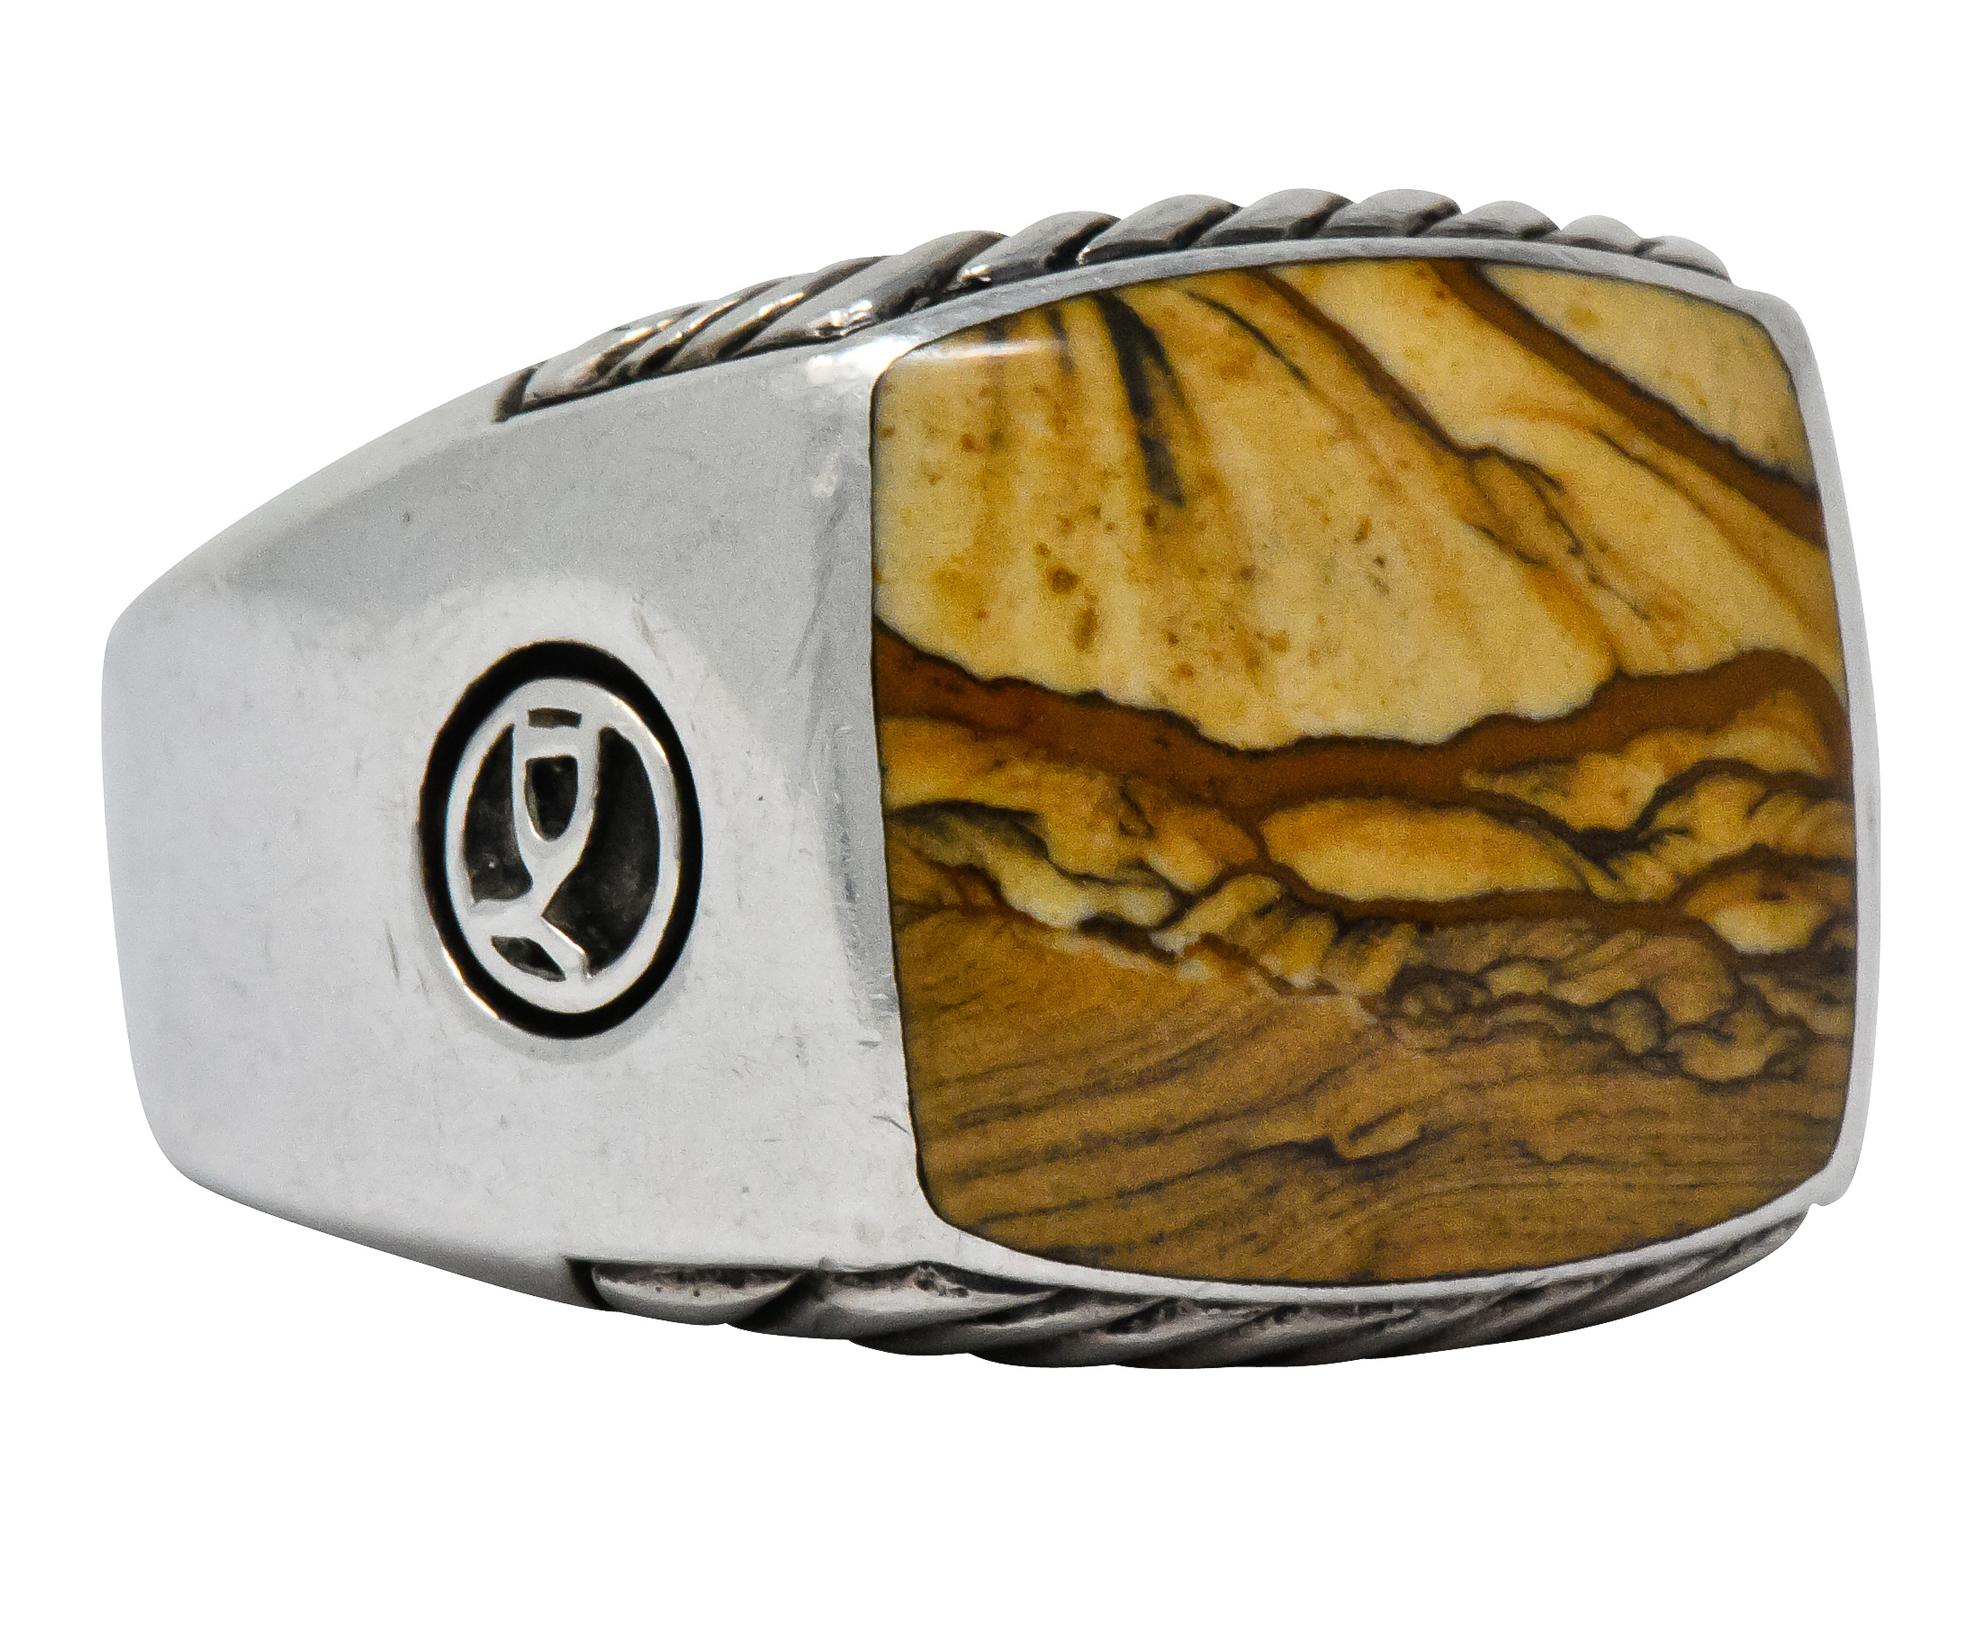 Centering an inlaid square slice of jasper, opaque and yellowish-brown to brown in color with a good polish

Natural jasper pattern presents as a desert landscape

Accompanied by ribbed silver pattern on profile faces

From David Yurman's Exotic